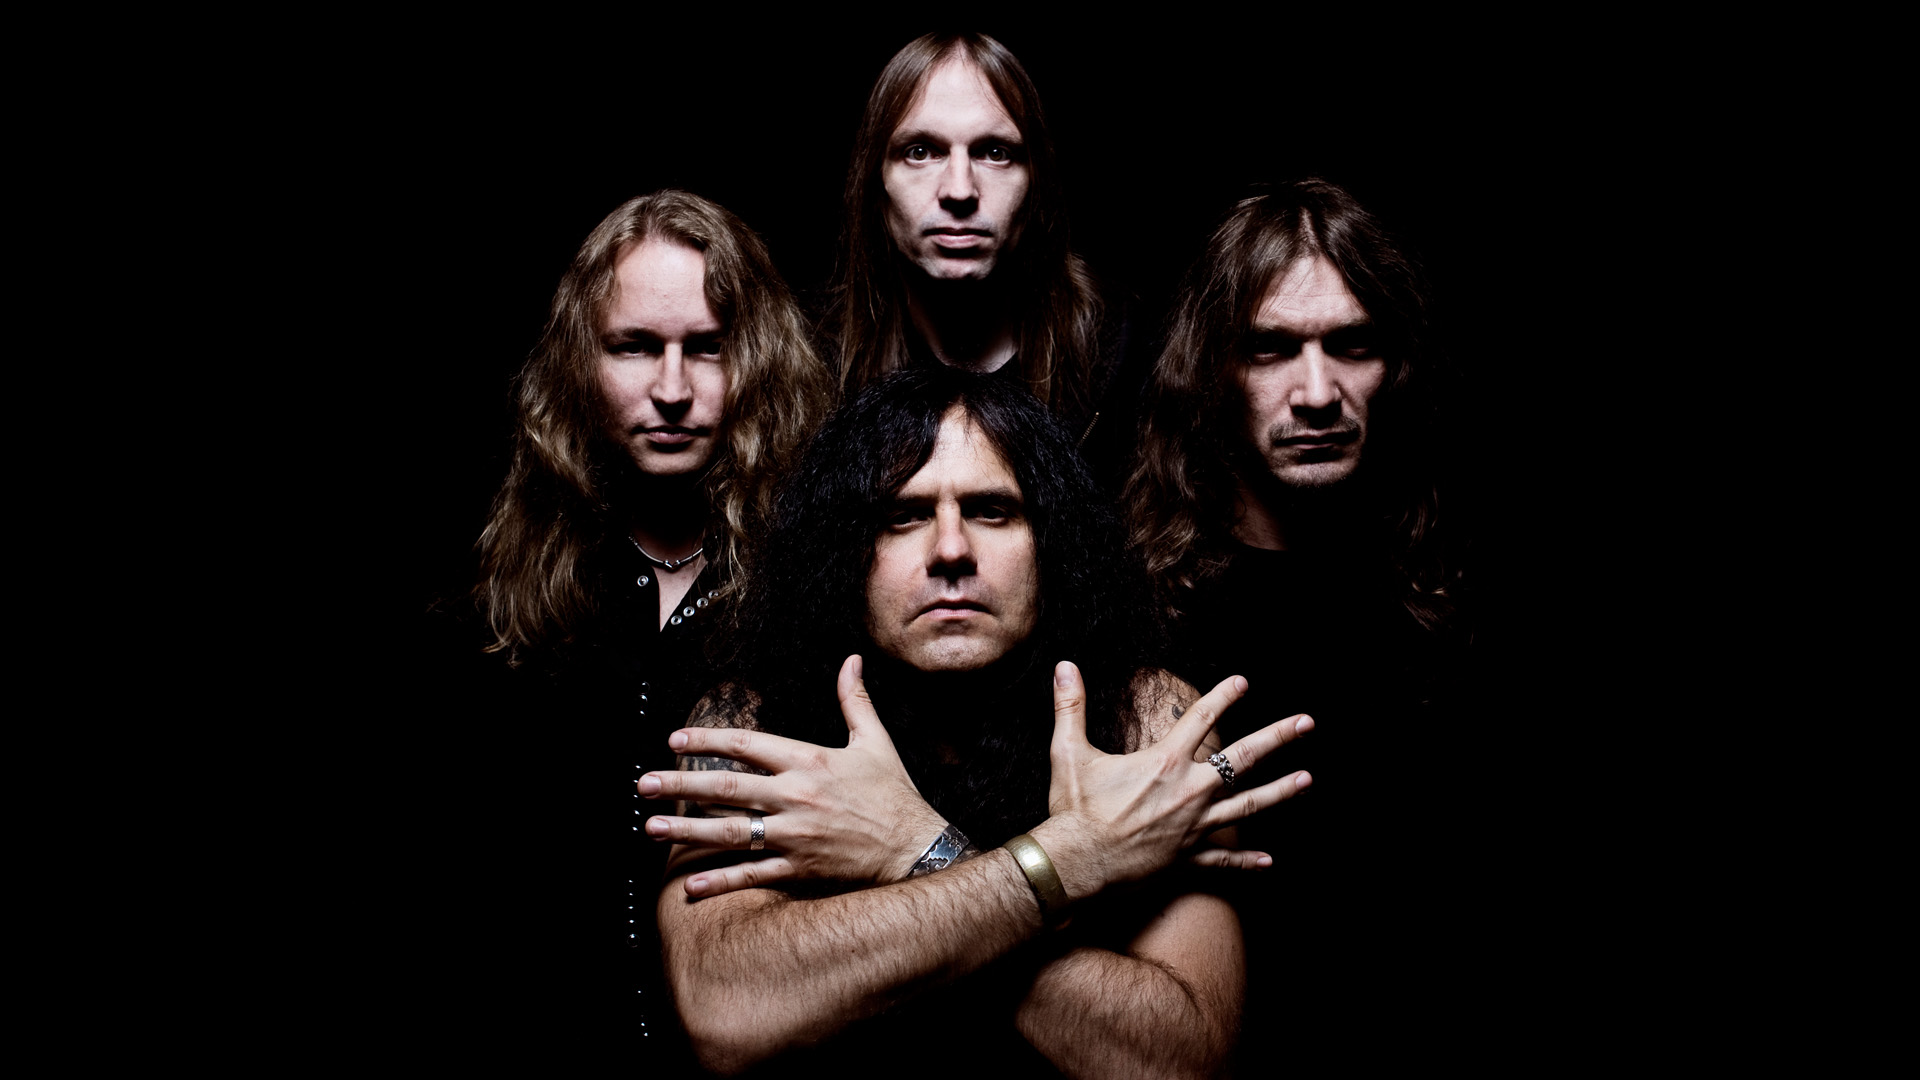 Kreator Backdrop Wallpaper - Kreator Band Extreme Aggression , HD Wallpaper & Backgrounds